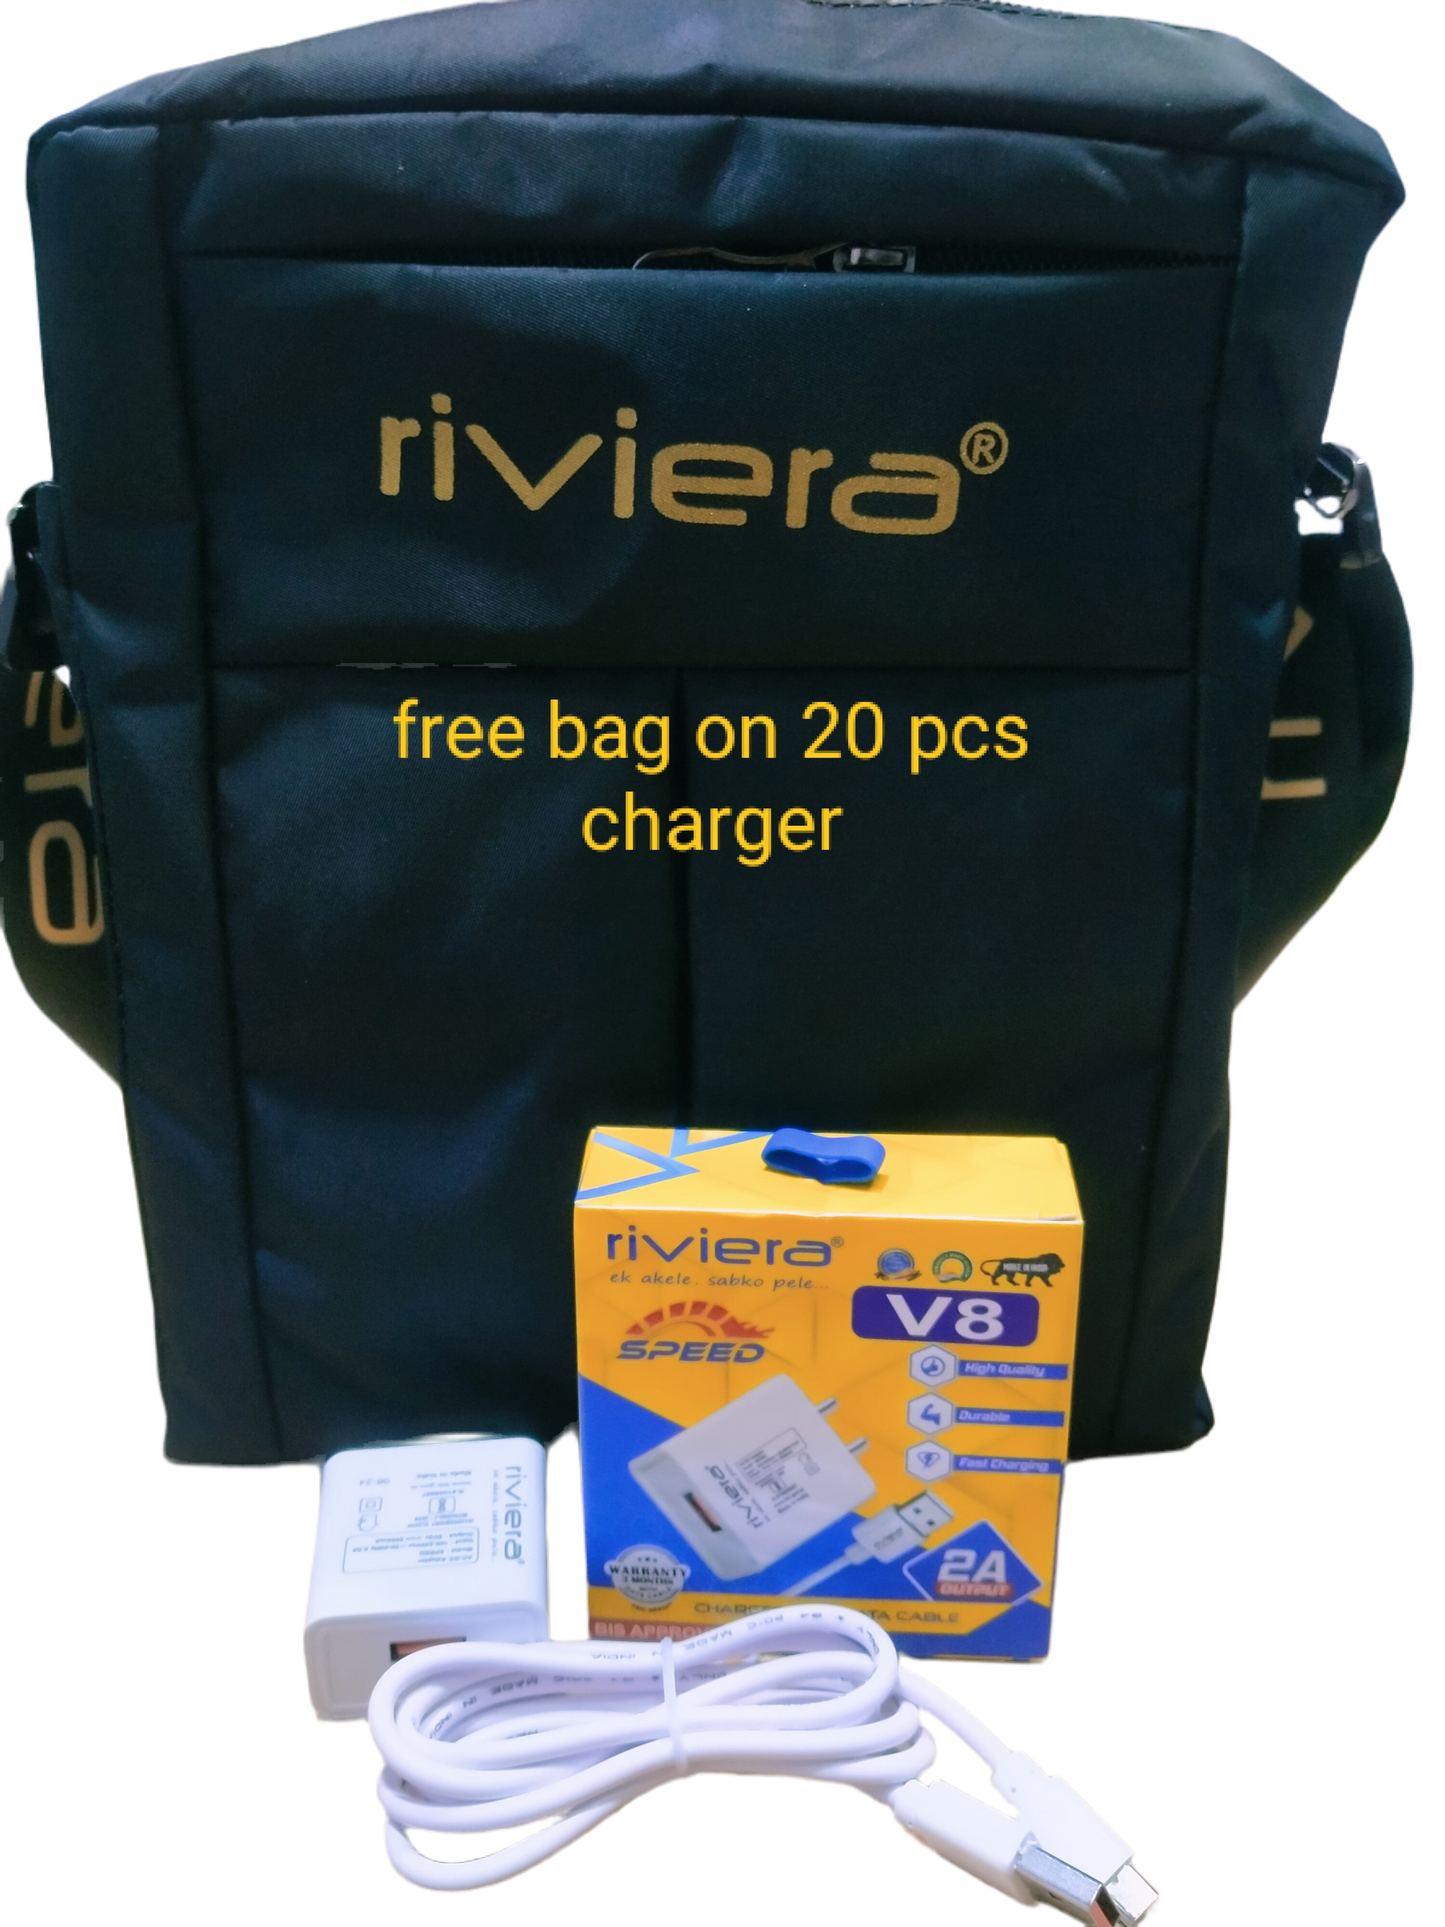 RIVIERA SPEED V8/micro, 2A charger- cross bag free on 20 pcs charger